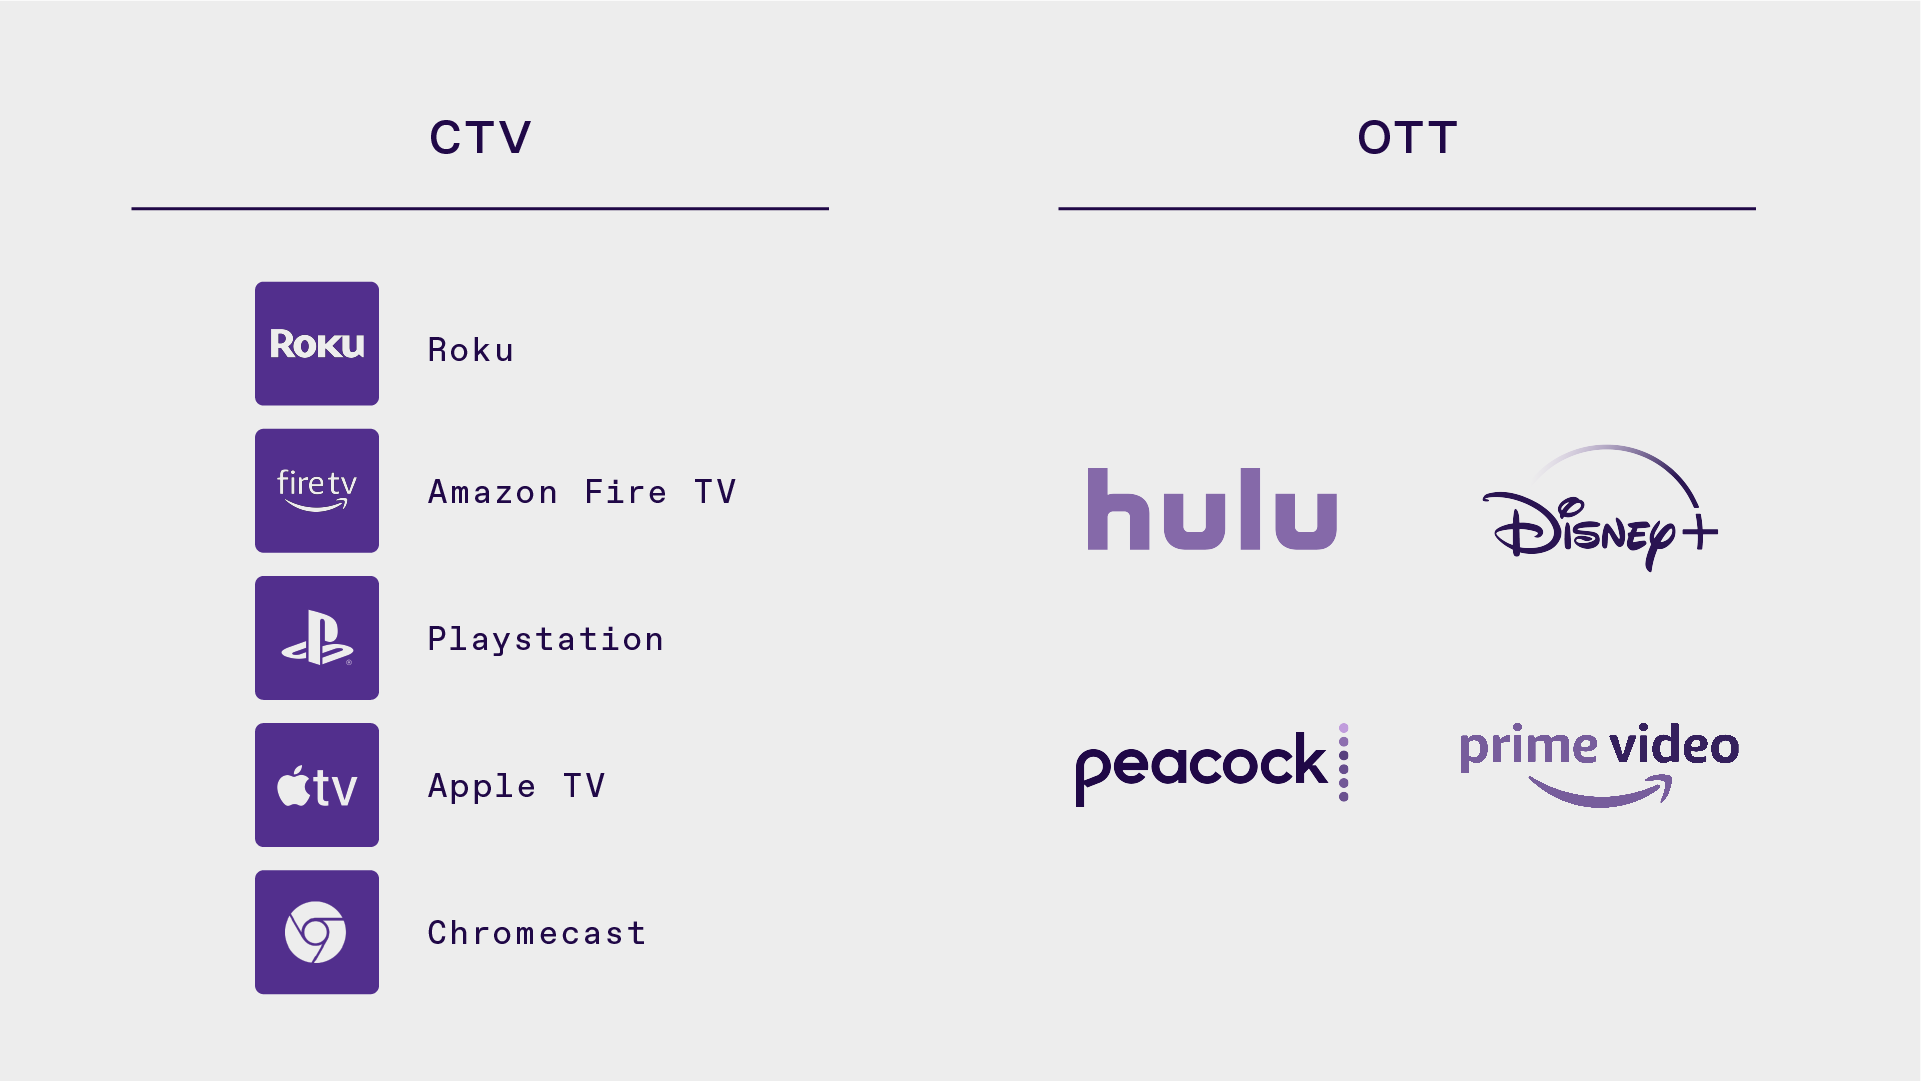 chart showing difference between CTV and OTT vendors